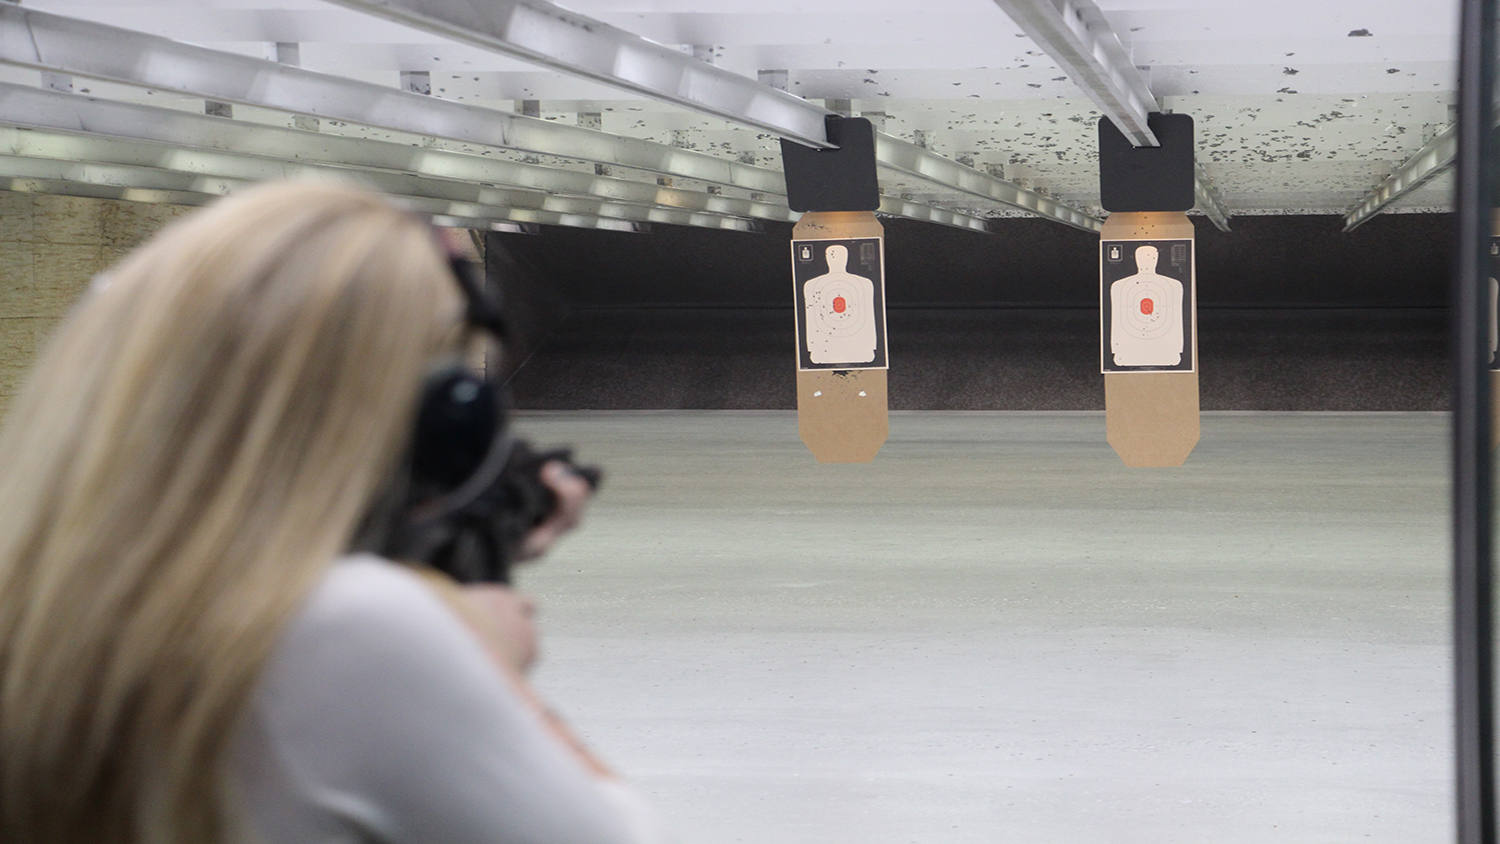 Female Shooters on the Rise